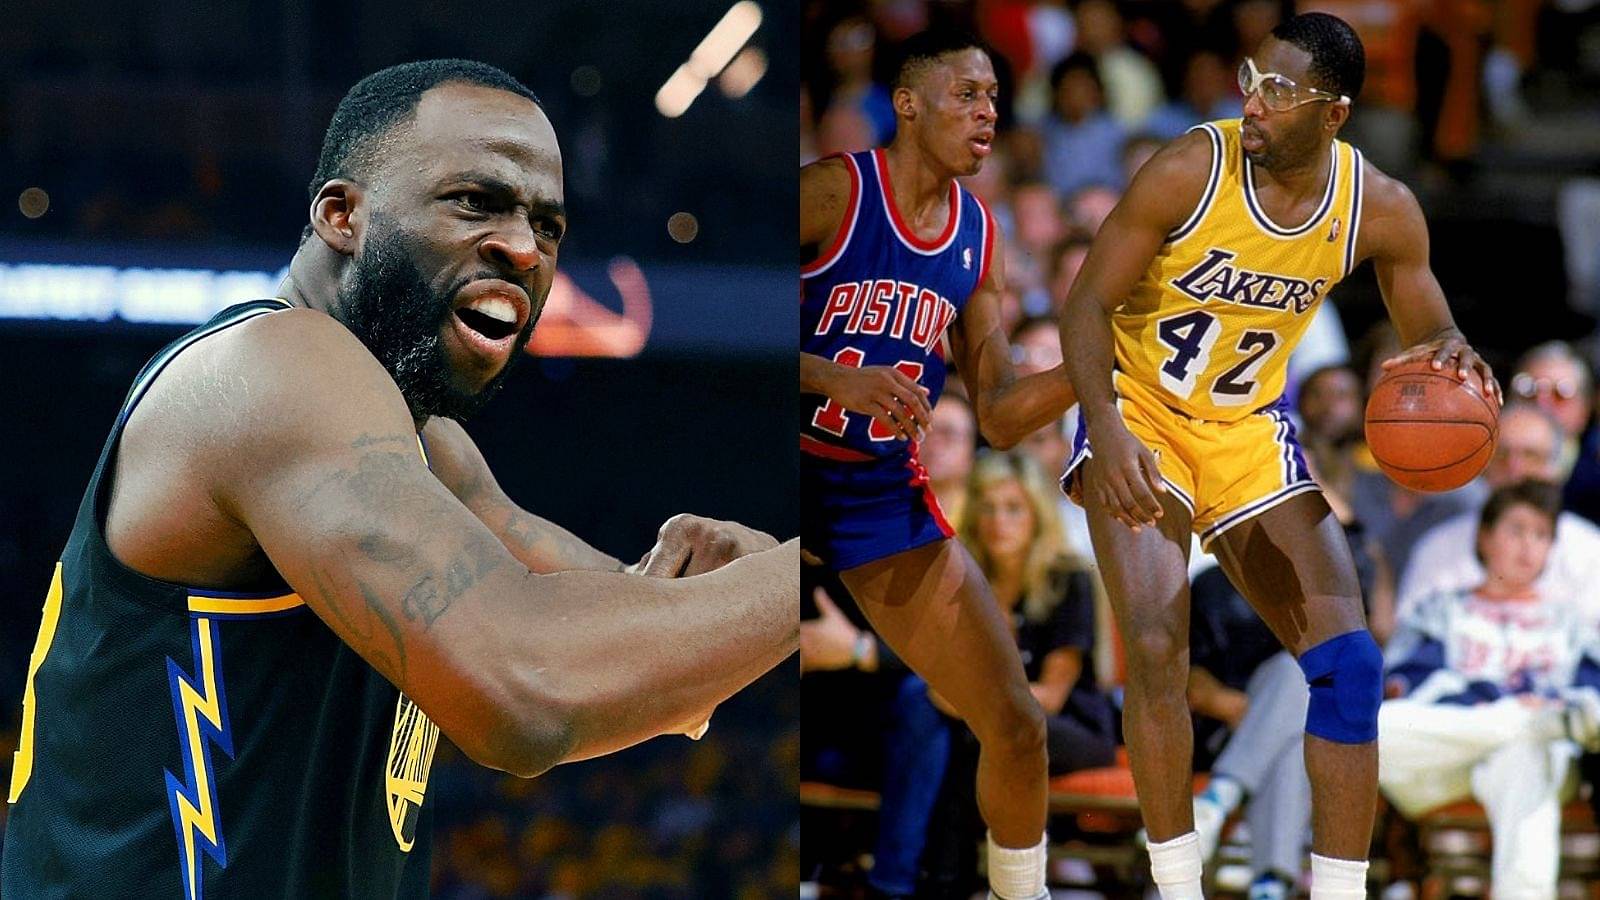 “Dennis Rodman would eat Draymond Green alive”: When James Worthy gave his opinion about the Warriors point-forward’s chances against The Worm